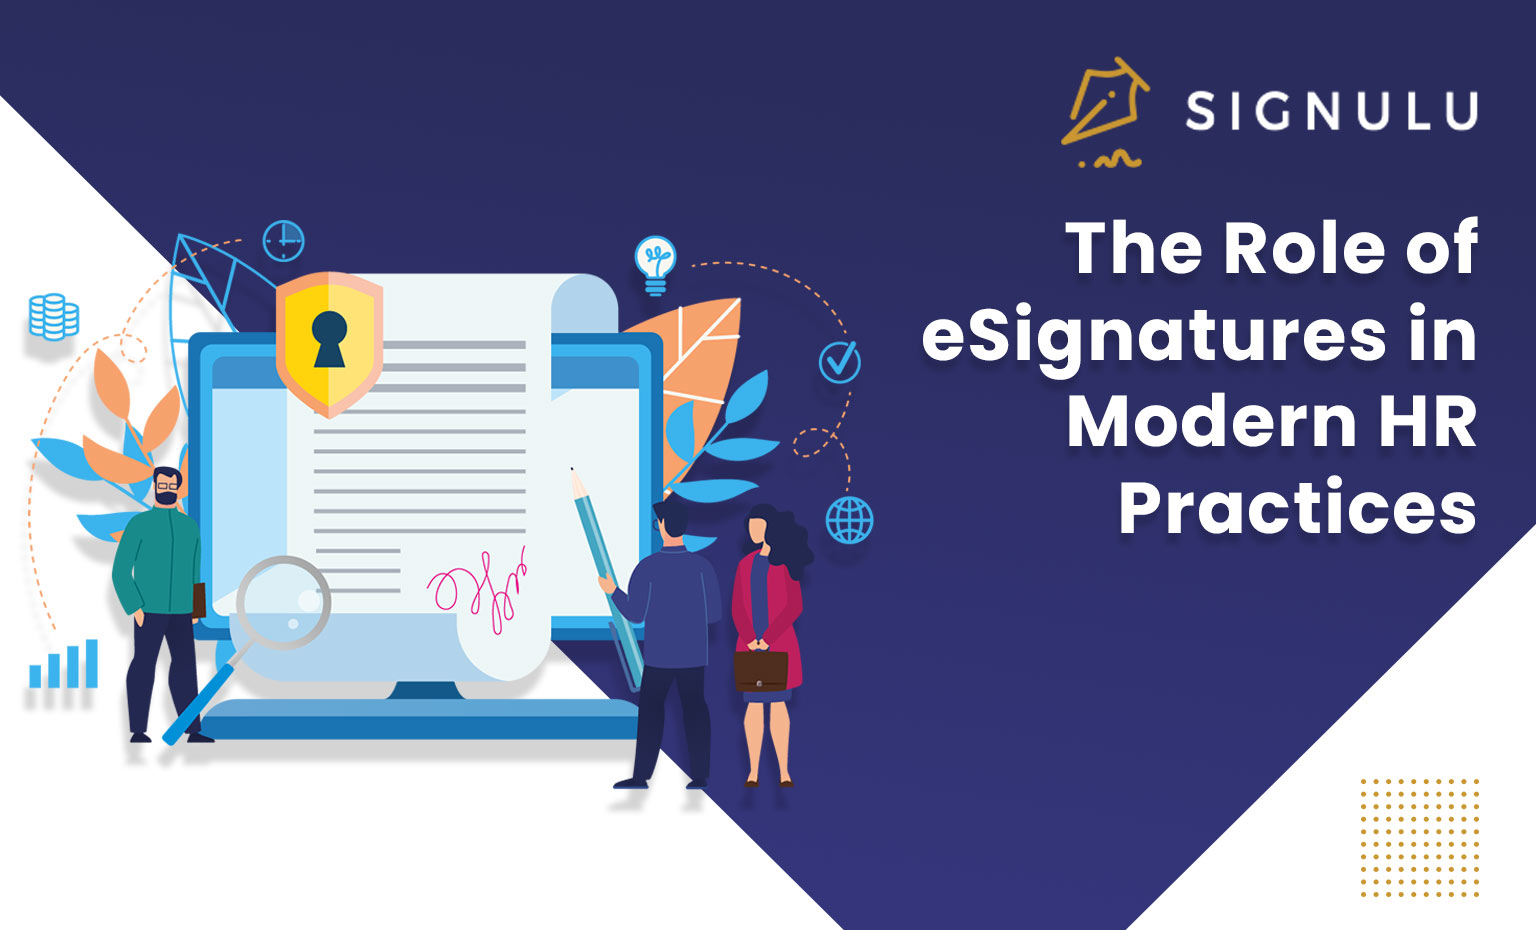 The Role of eSignatures in Modern HR Practices